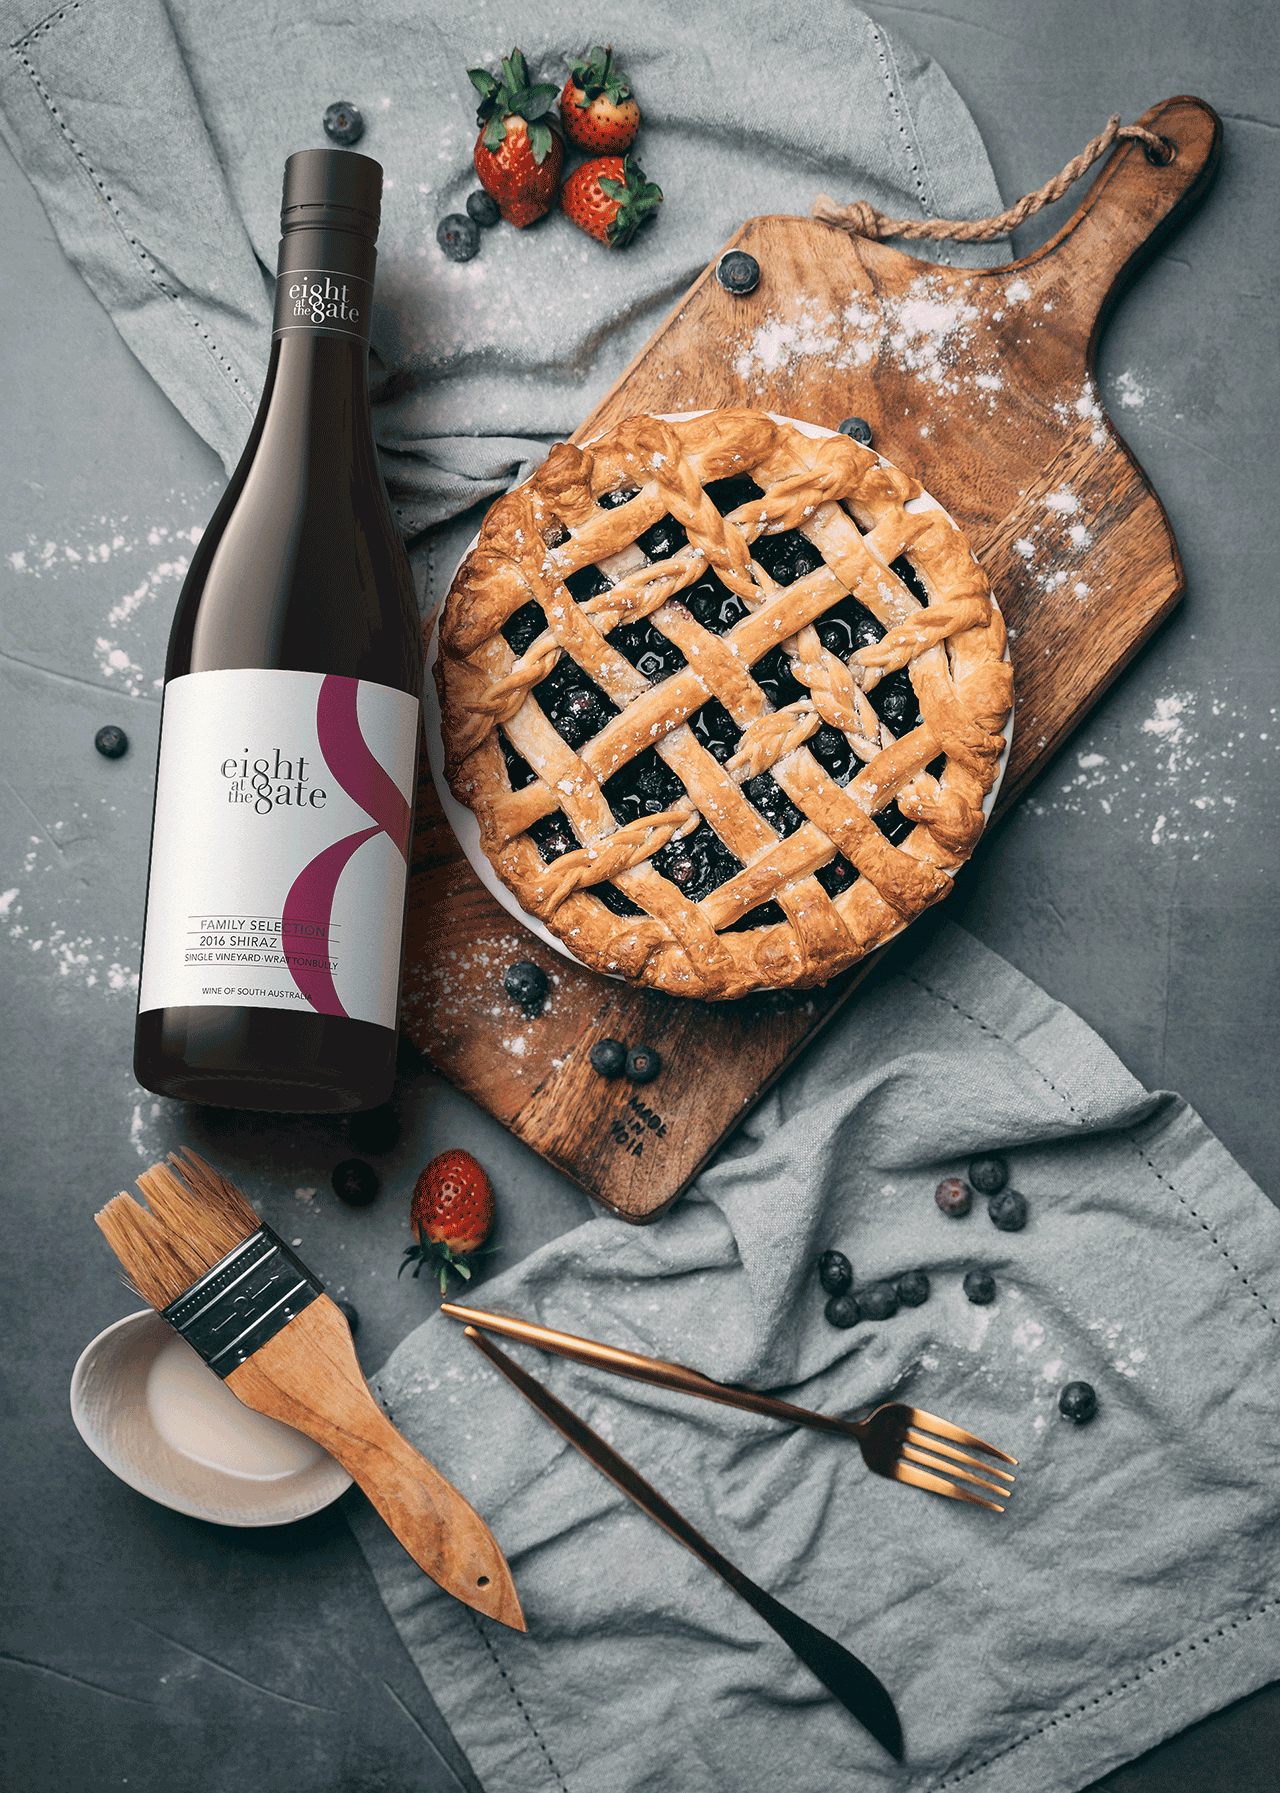 Eight at the Gate 2016 Shiraz on a table next to a blue berry pie.